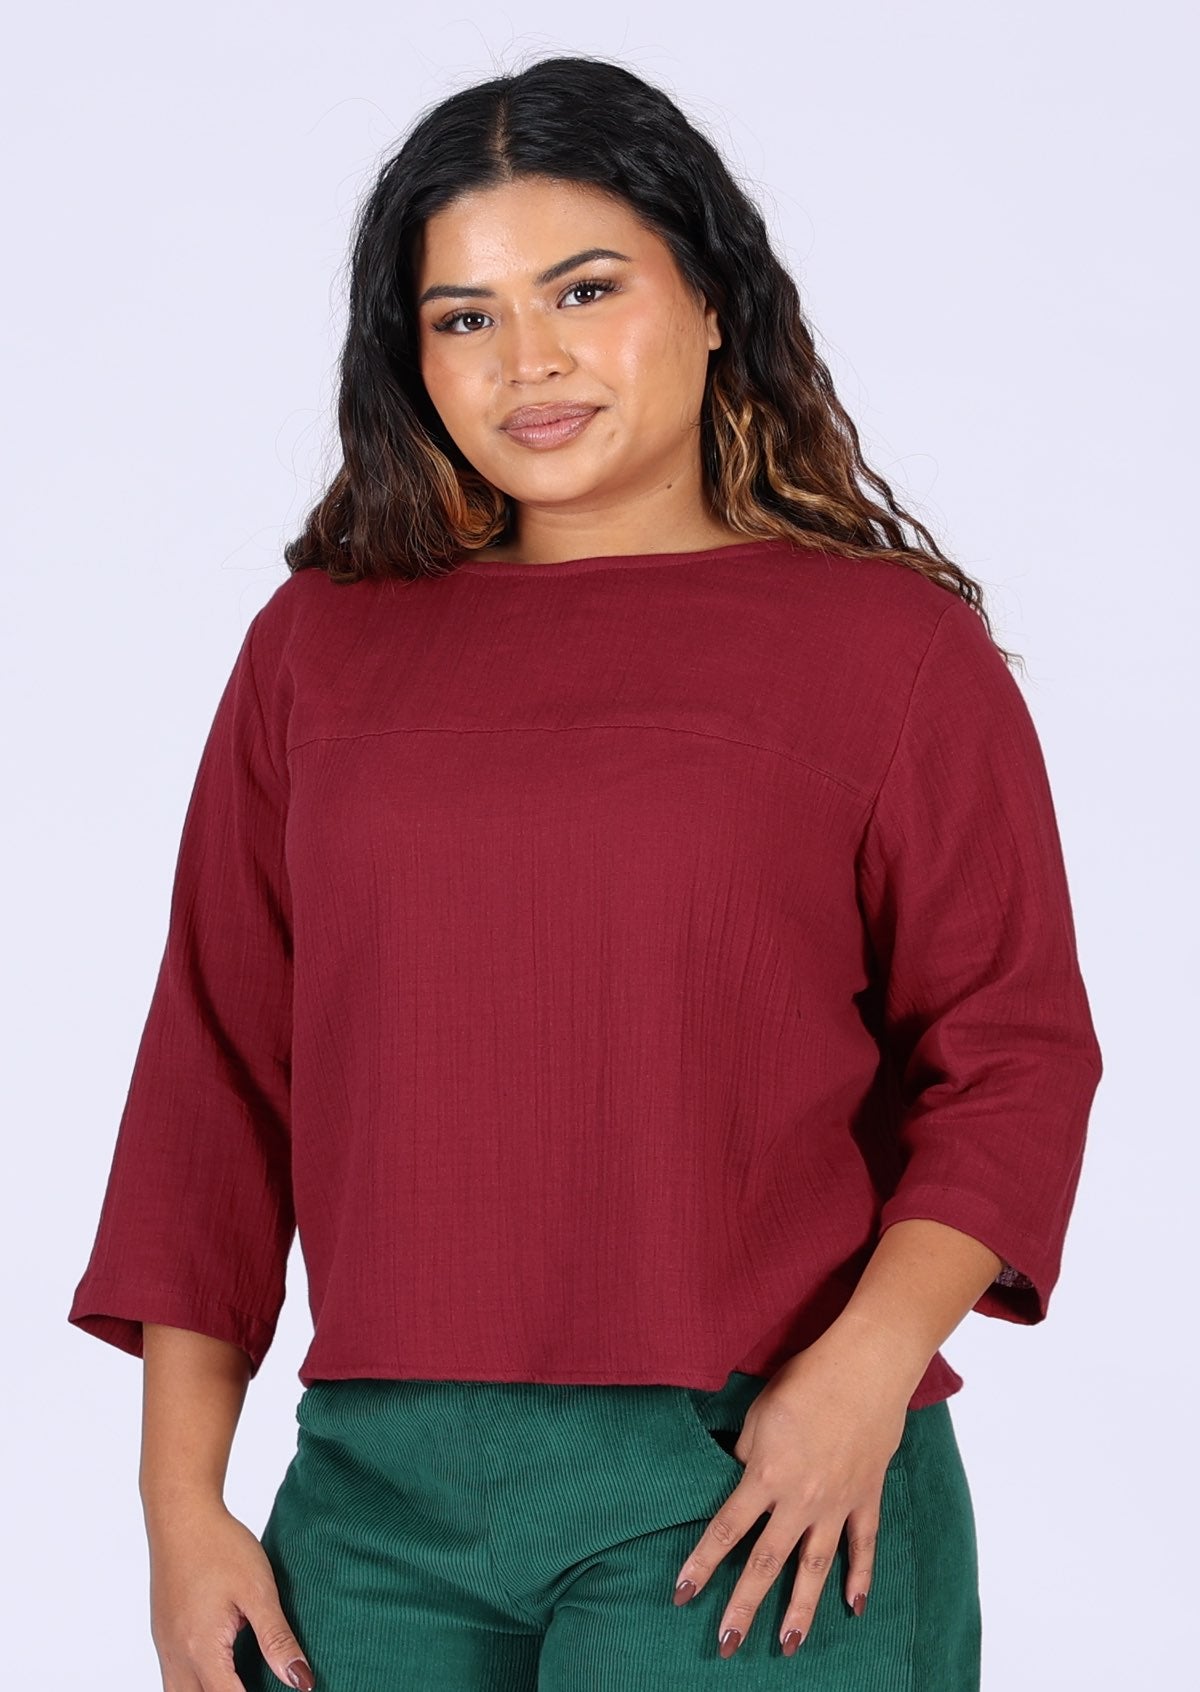 Warm red cotton gauze top with 3/4 sleeves and high round neckline